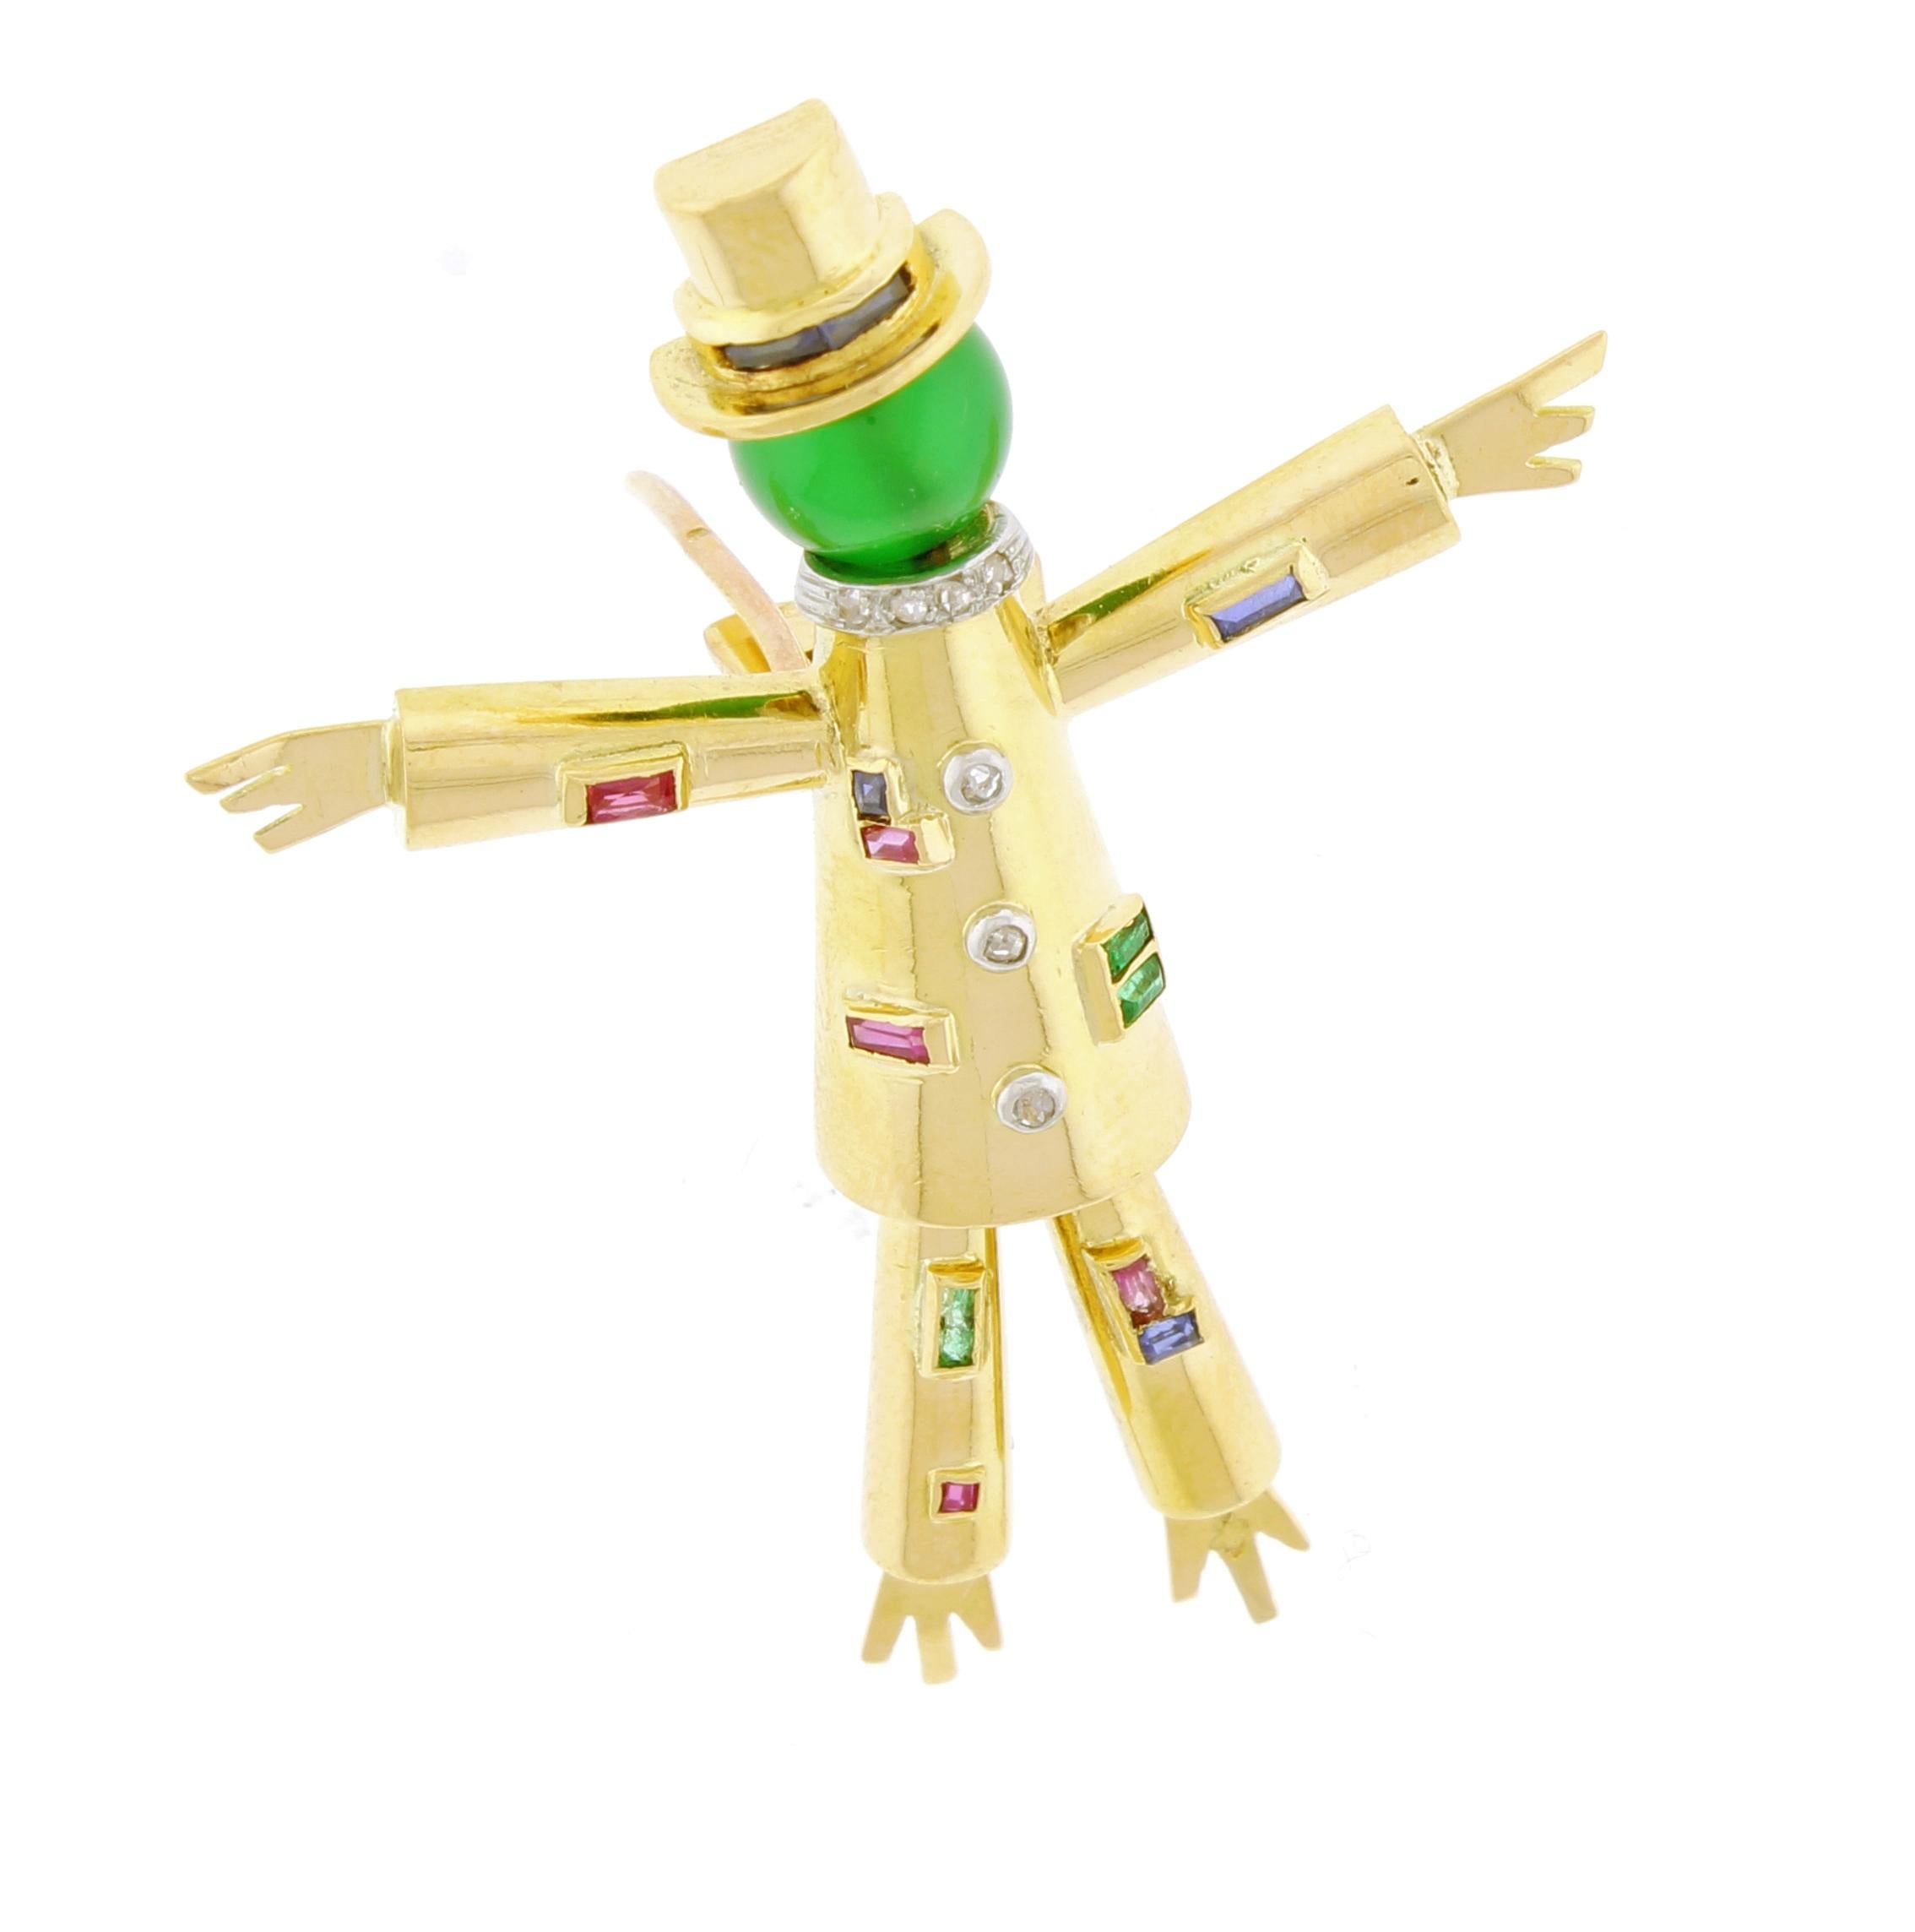 Jacques  Lacloche created the l'épouvantail (scarecrow)  clip brooch to commemorate the opening of his salon in Pairs. The registered design is crafted in 18 karat gold with rubies diamond sapphire emeralds and a green glass bead.  2 inches high